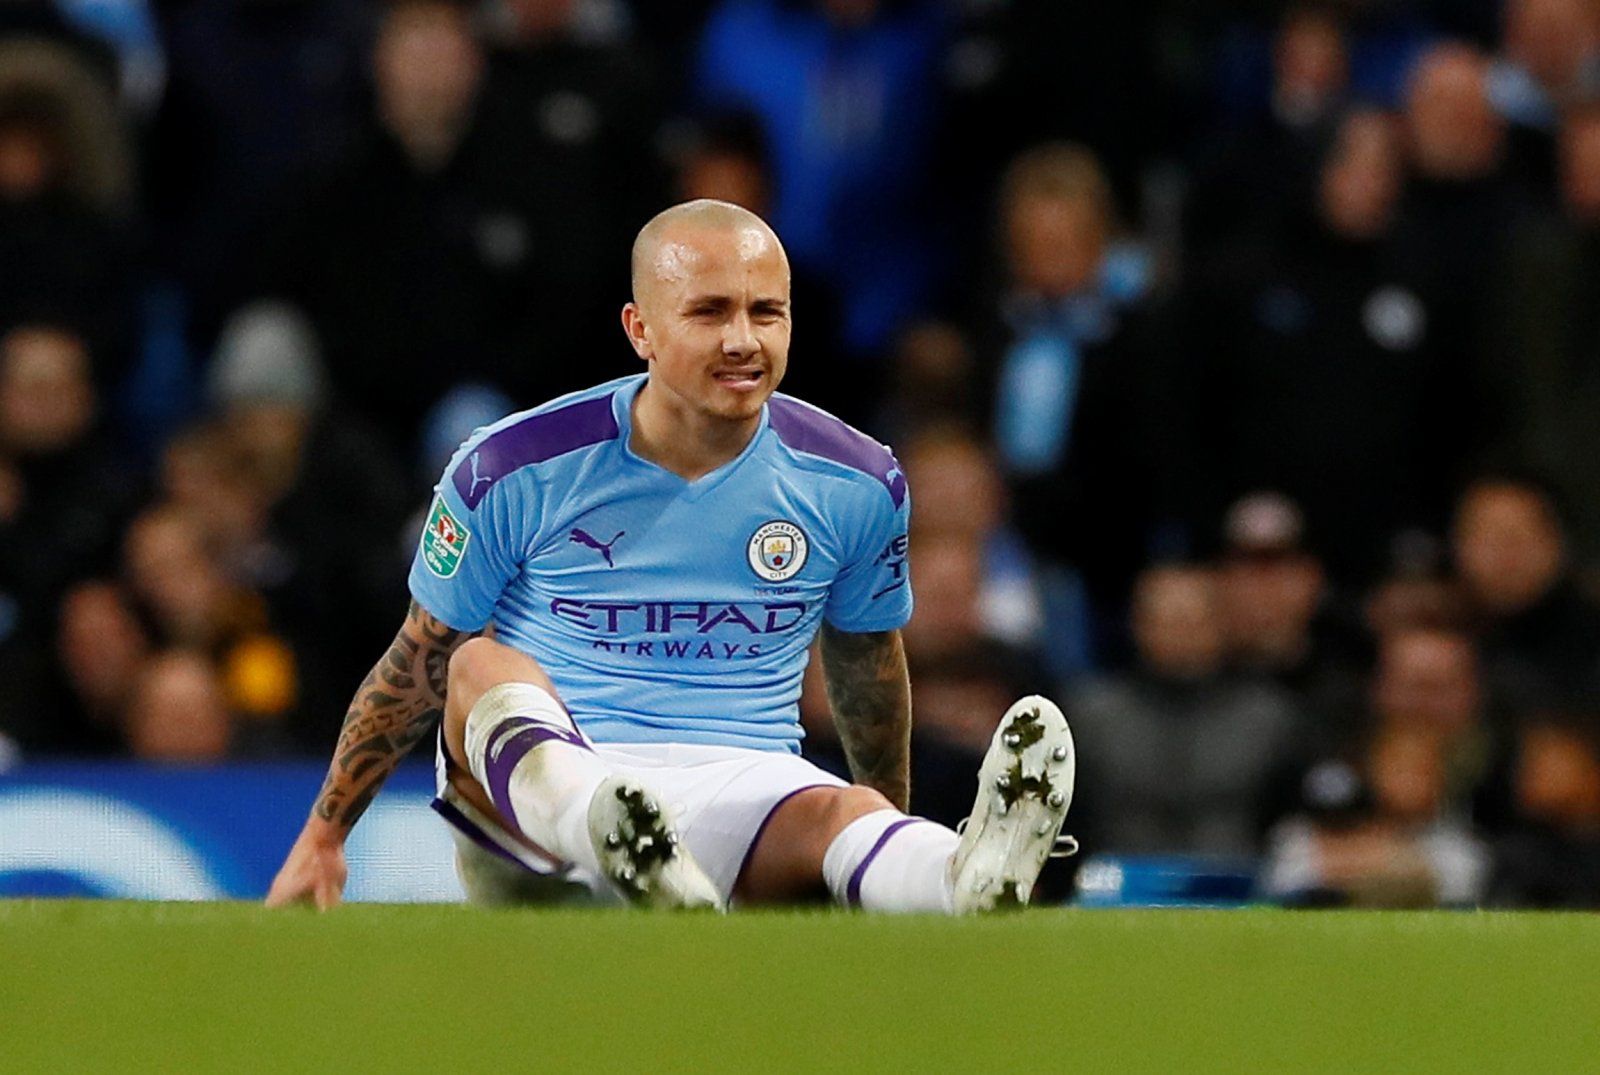 Manchester City: Pep Guardiola’s Angelino stance angers some fans -Manchester City